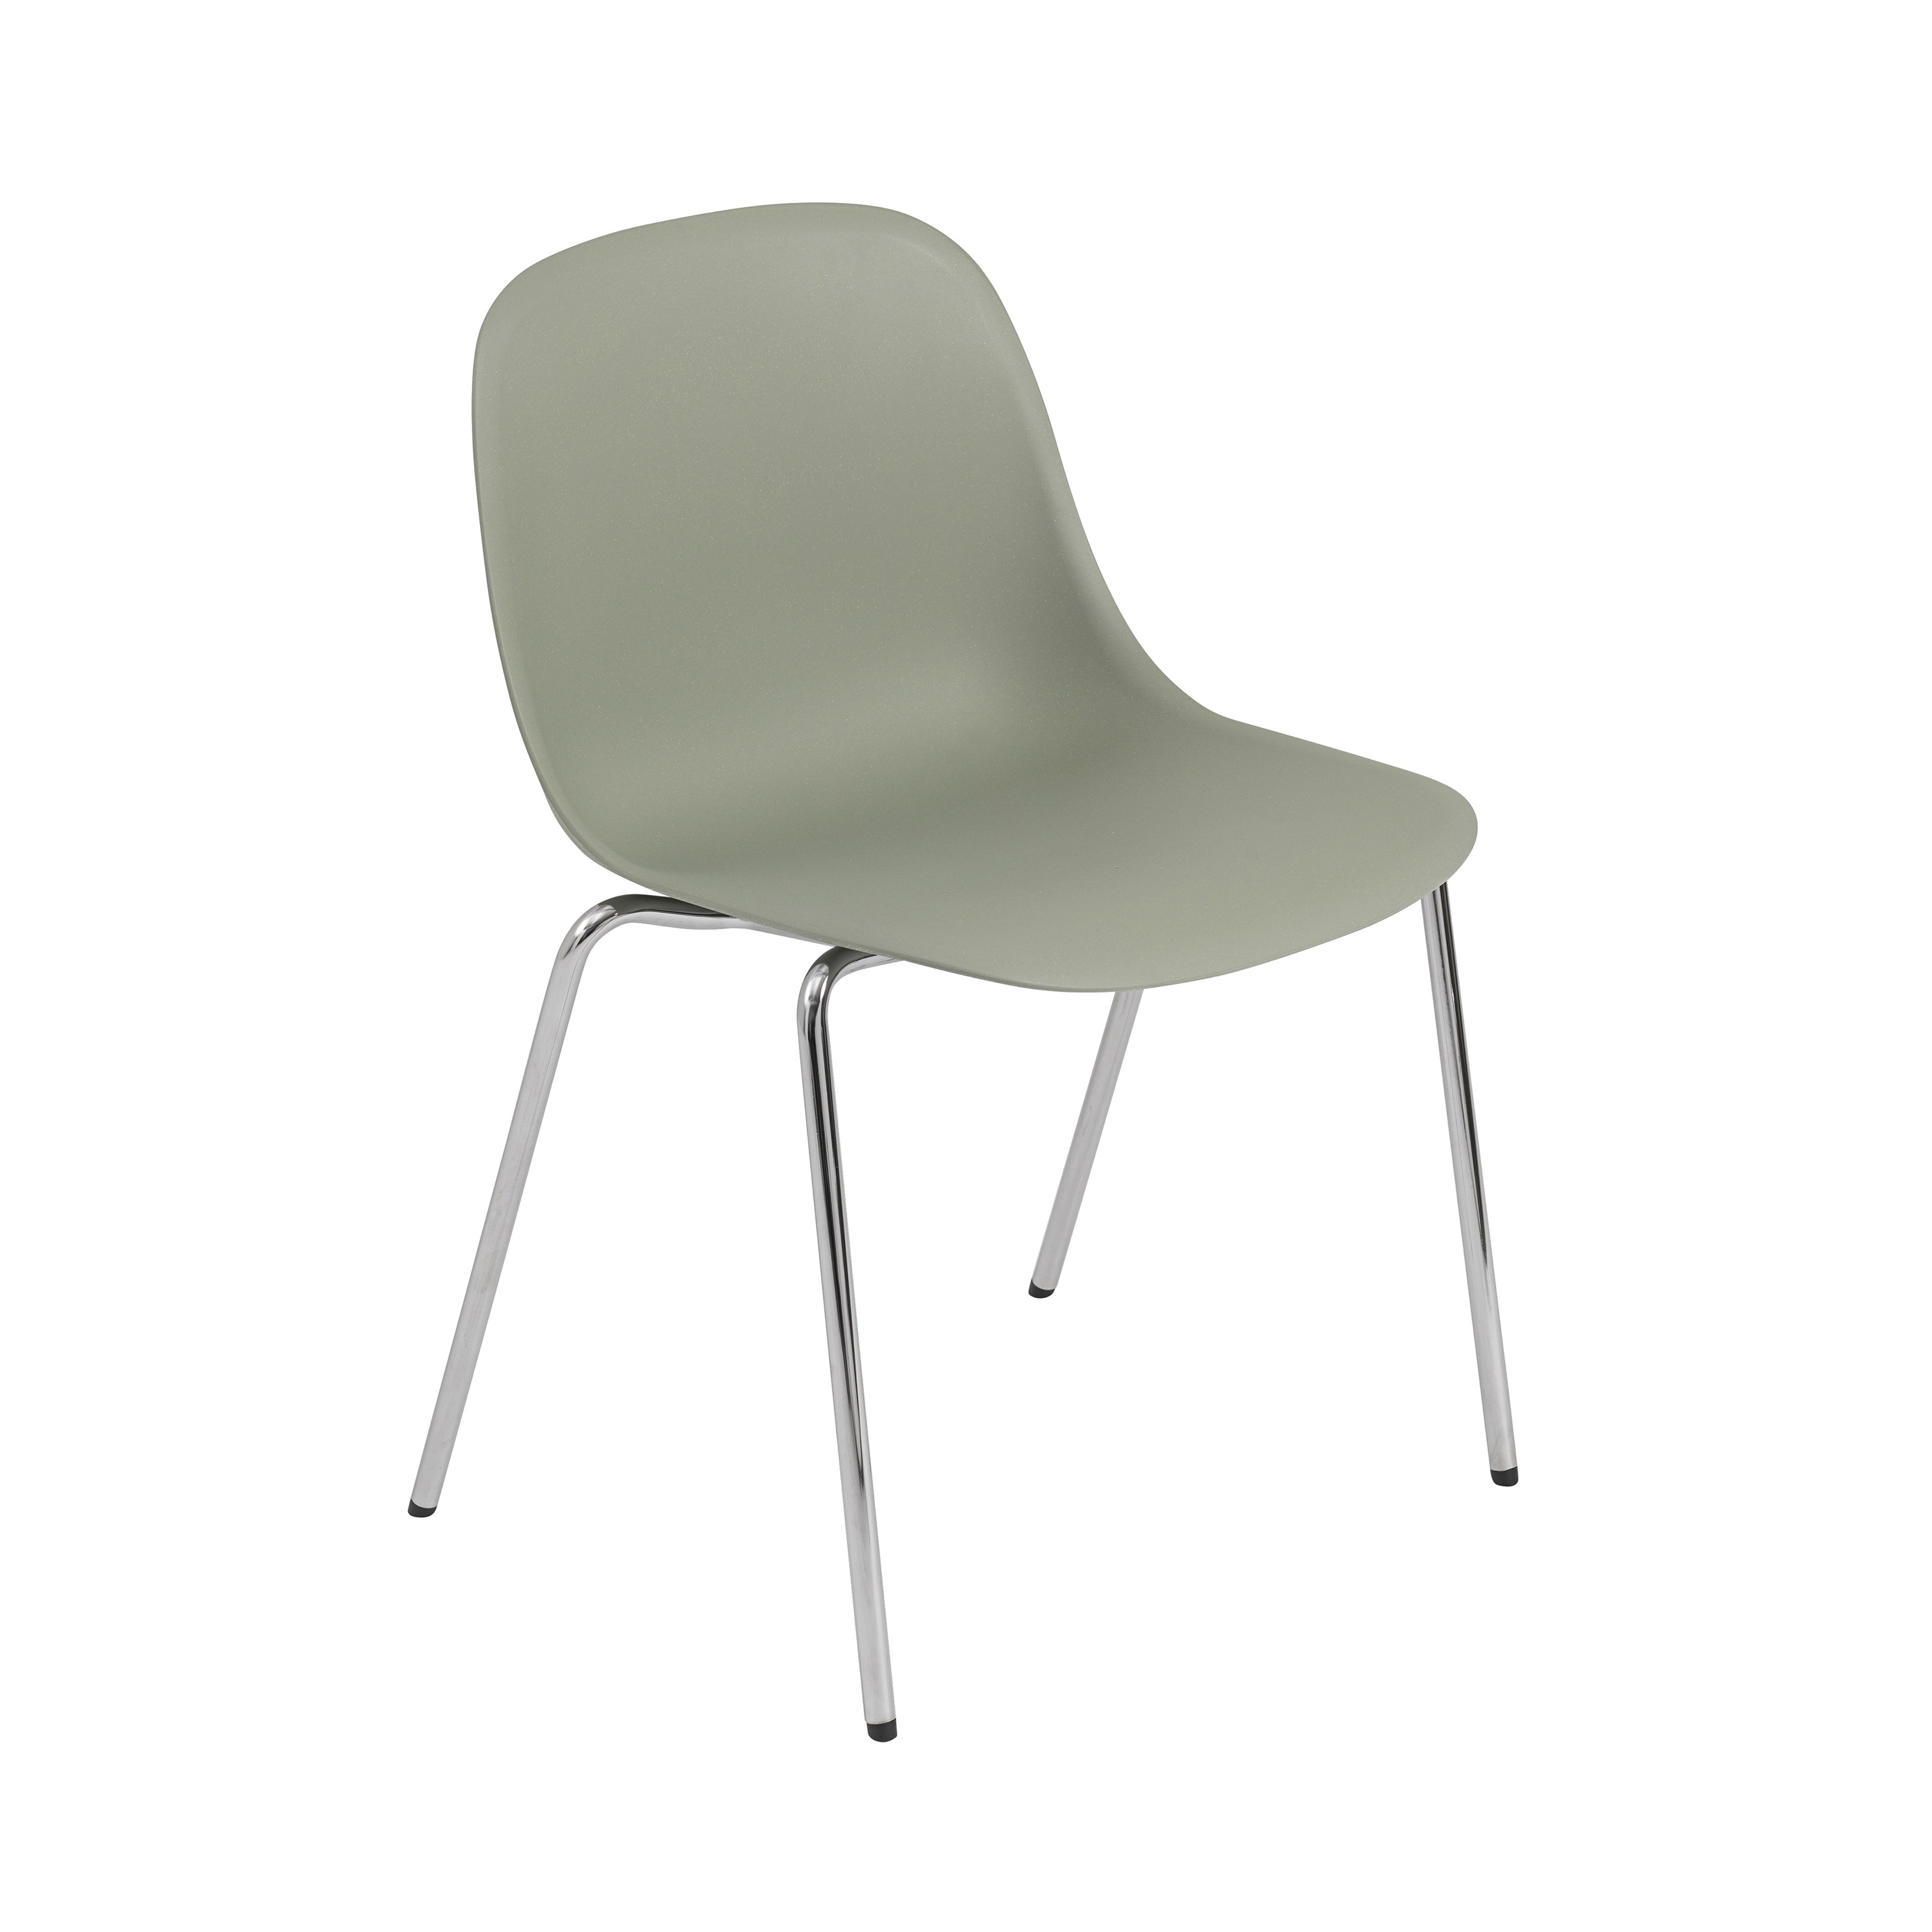 Fiber Side Chair: A-Base with Glides + Dusty Green